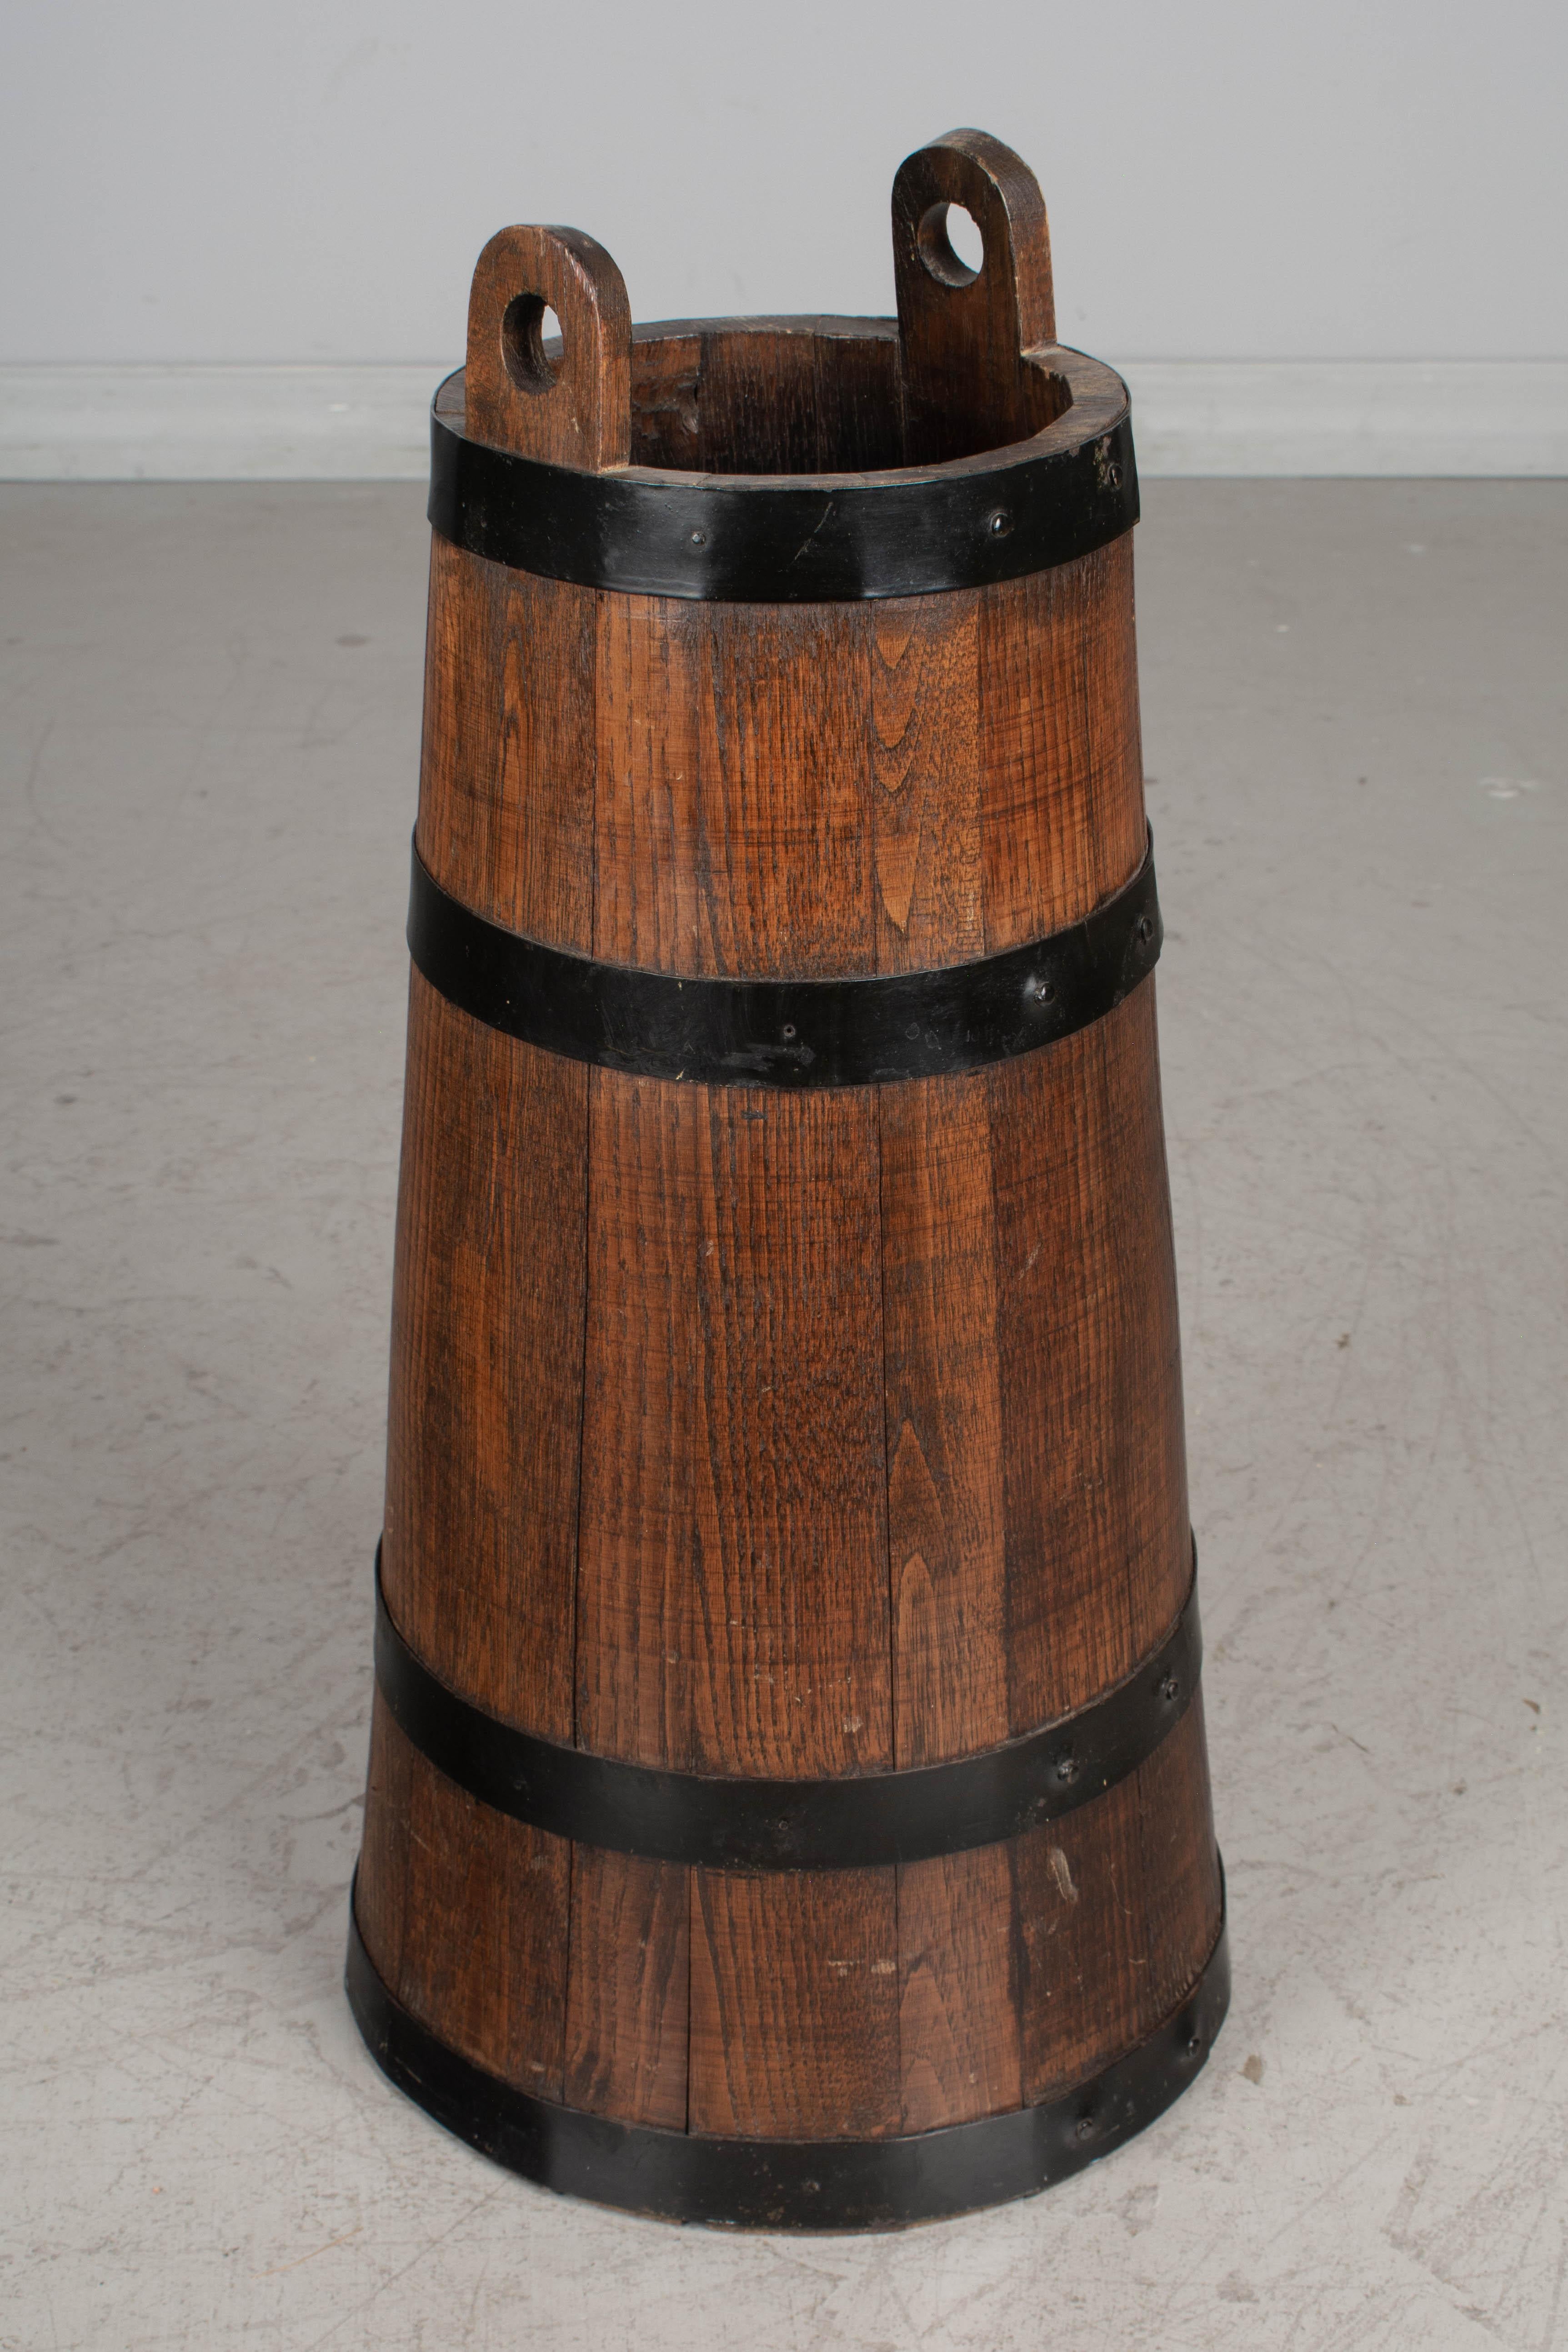 A Country French barrel form umbrella stand from Normandy. Hand crafted of chestnut wood with iron strapping. Waxed patina. A good sturdy container for walking sticks or riding crops. 
Height: 23.5